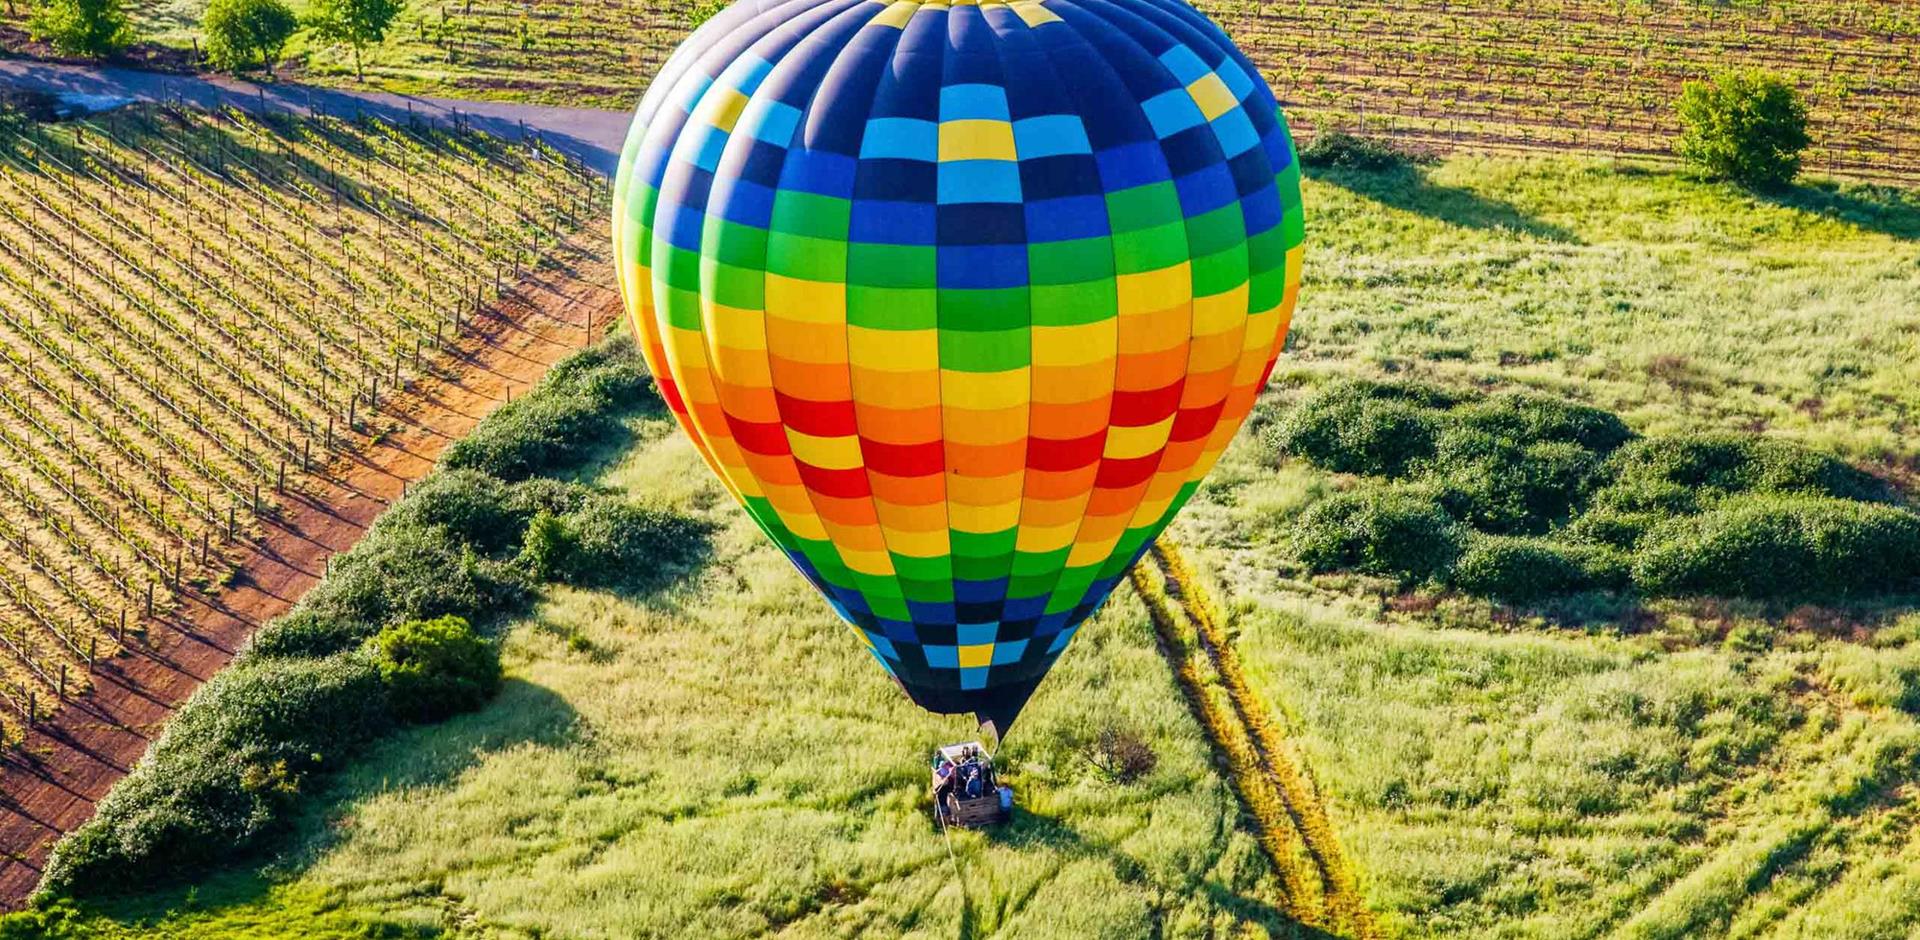 Hot air balloon, Colombia, South America